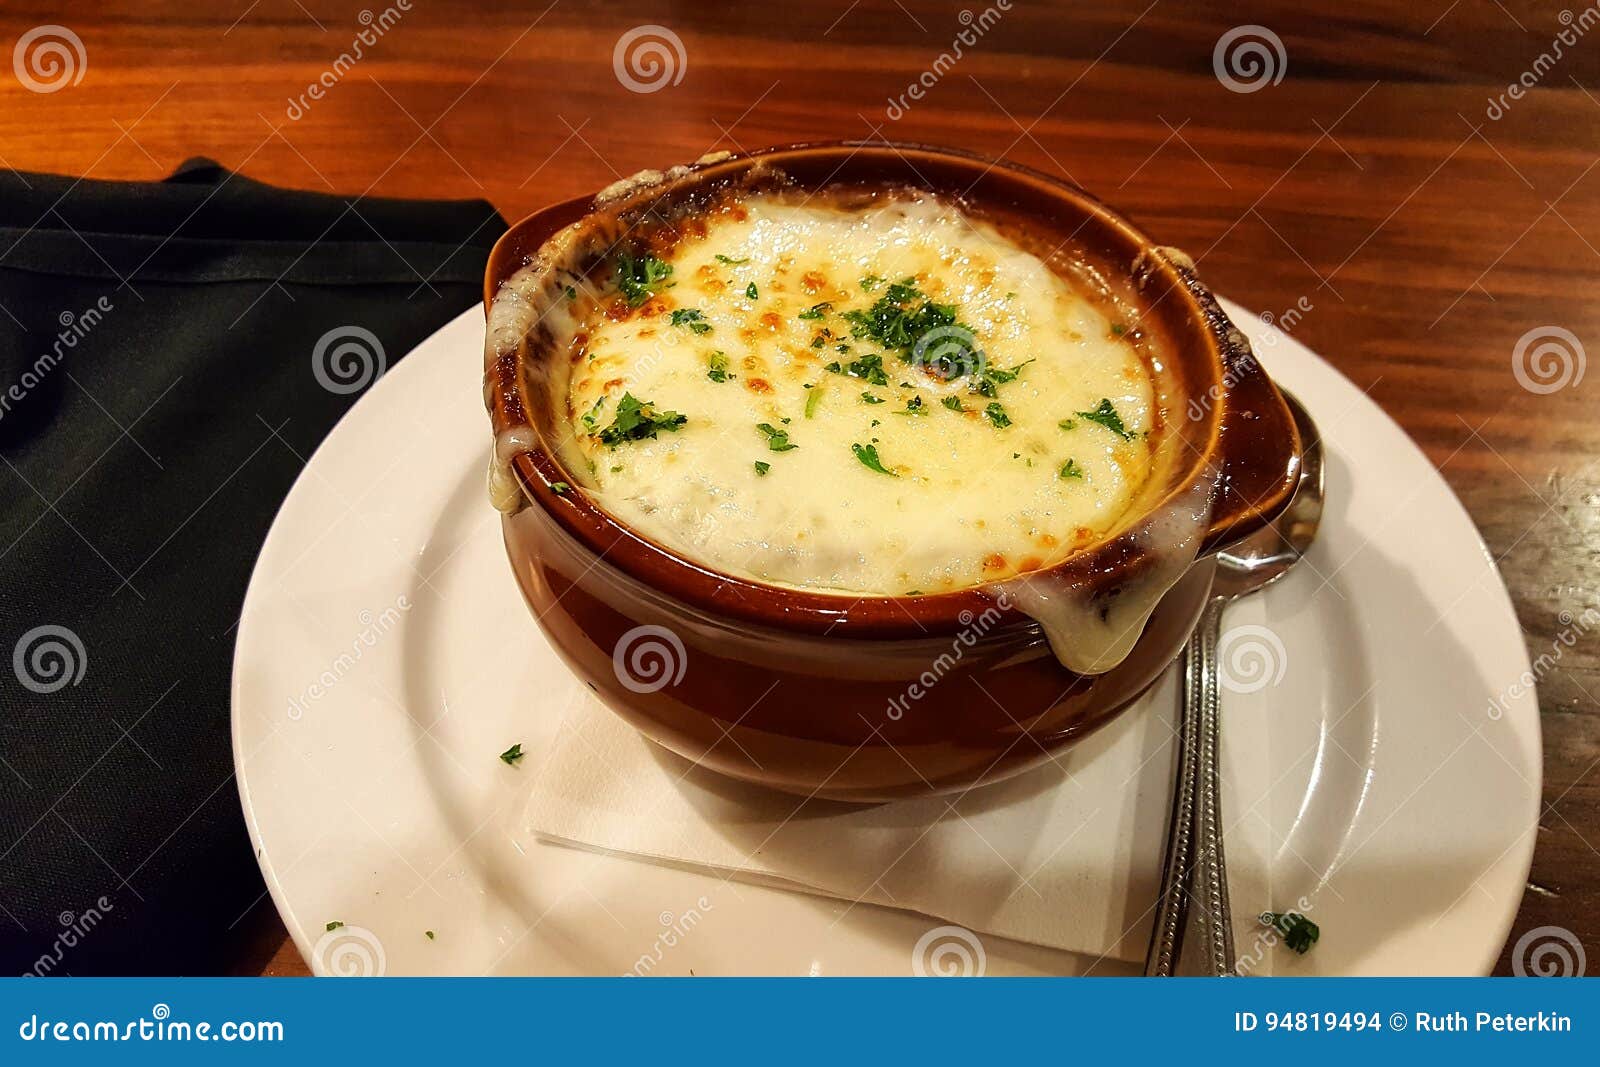 crock of french onion soup